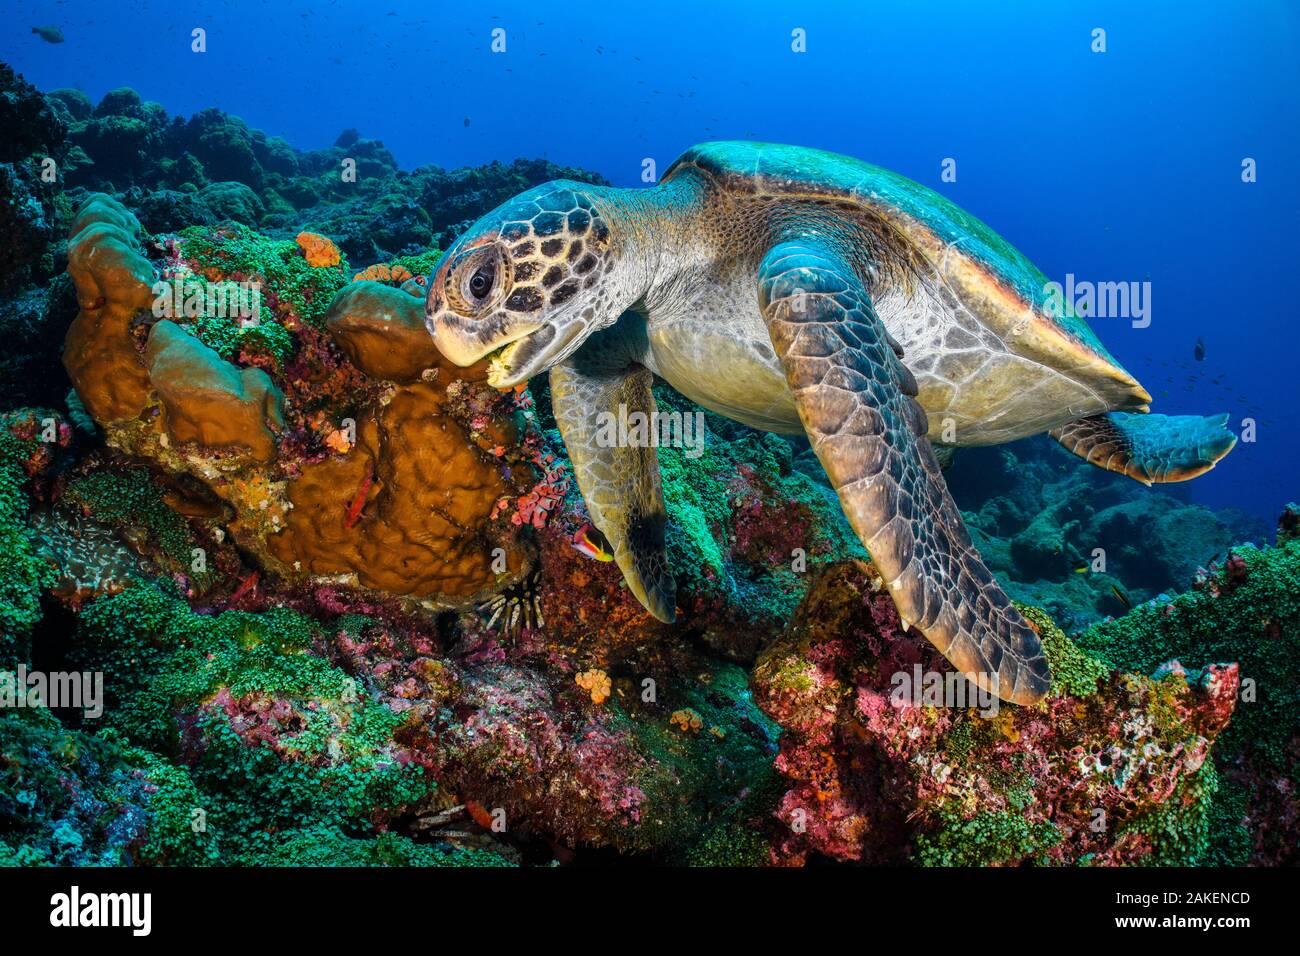 Galapagos green turtle (Chelonia mydas agassizii) swims over a coral reef. Darwin Island, Galapagos National Park, Galapagos Islands. East Pacific Ocean. Stock Photo